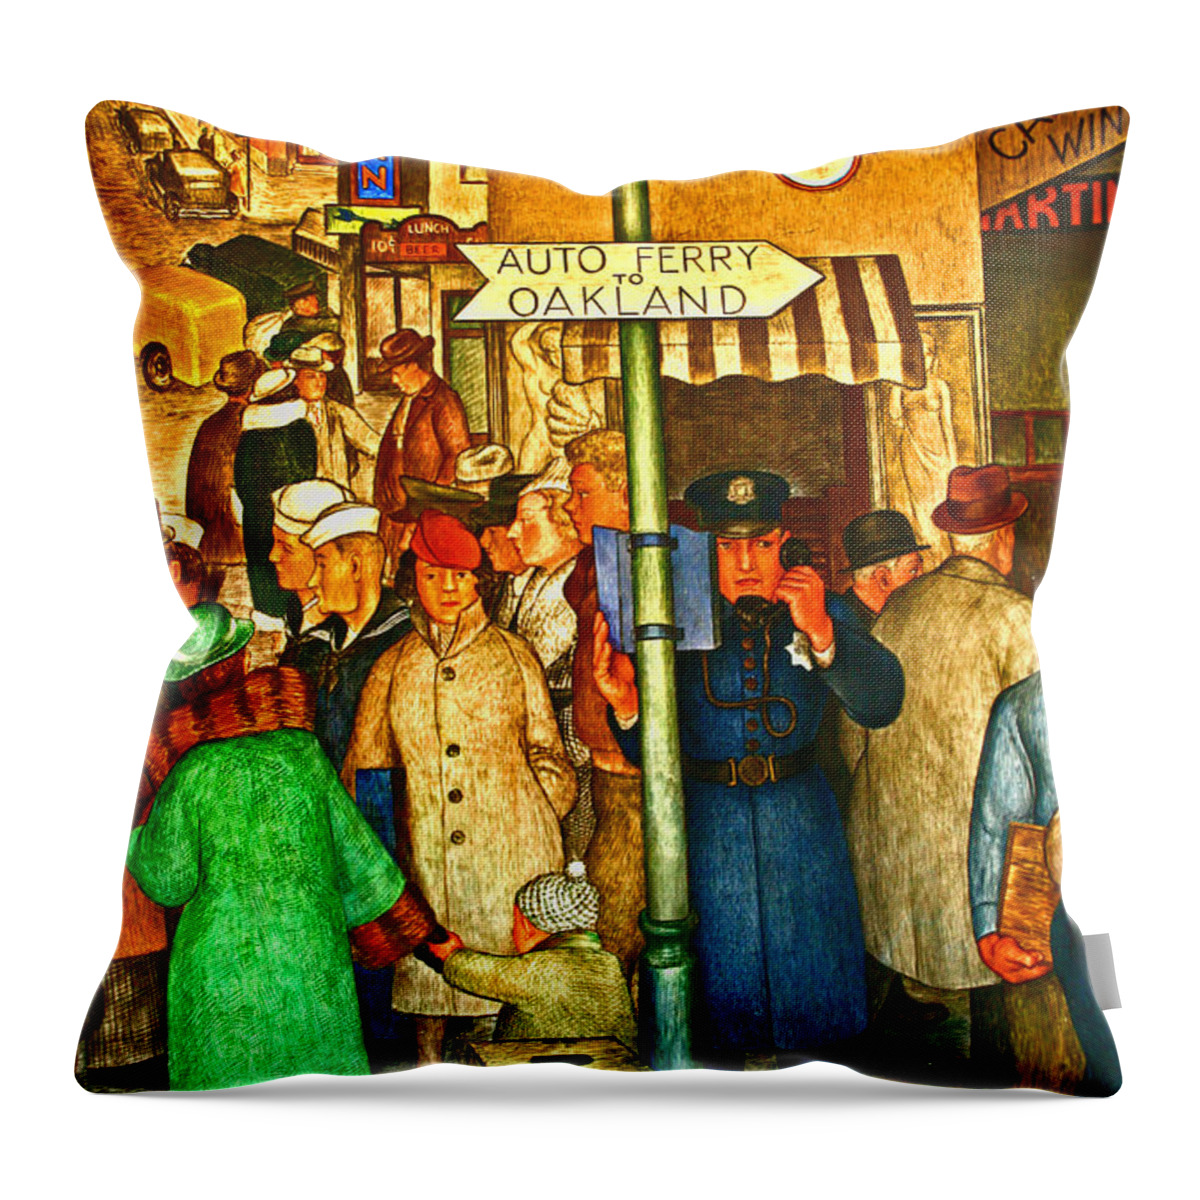 Coit Tower Throw Pillow featuring the photograph In Blue To Serve and Protect by Joseph Coulombe